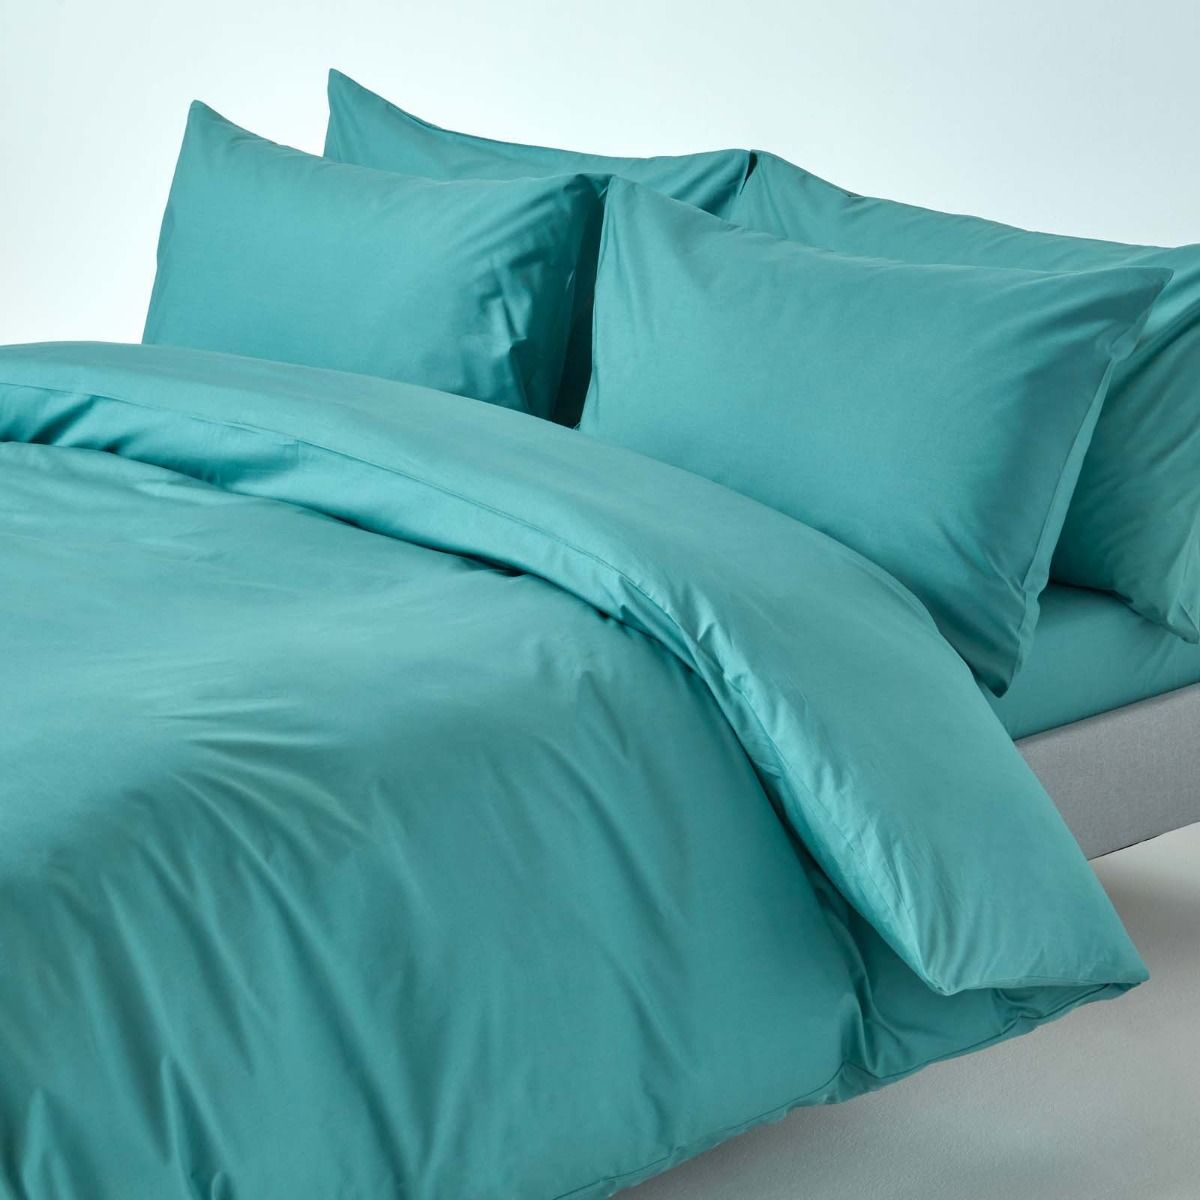 Teal Egyptian Cotton Duvet Cover With, Teal Brushed Cotton Duvet Set